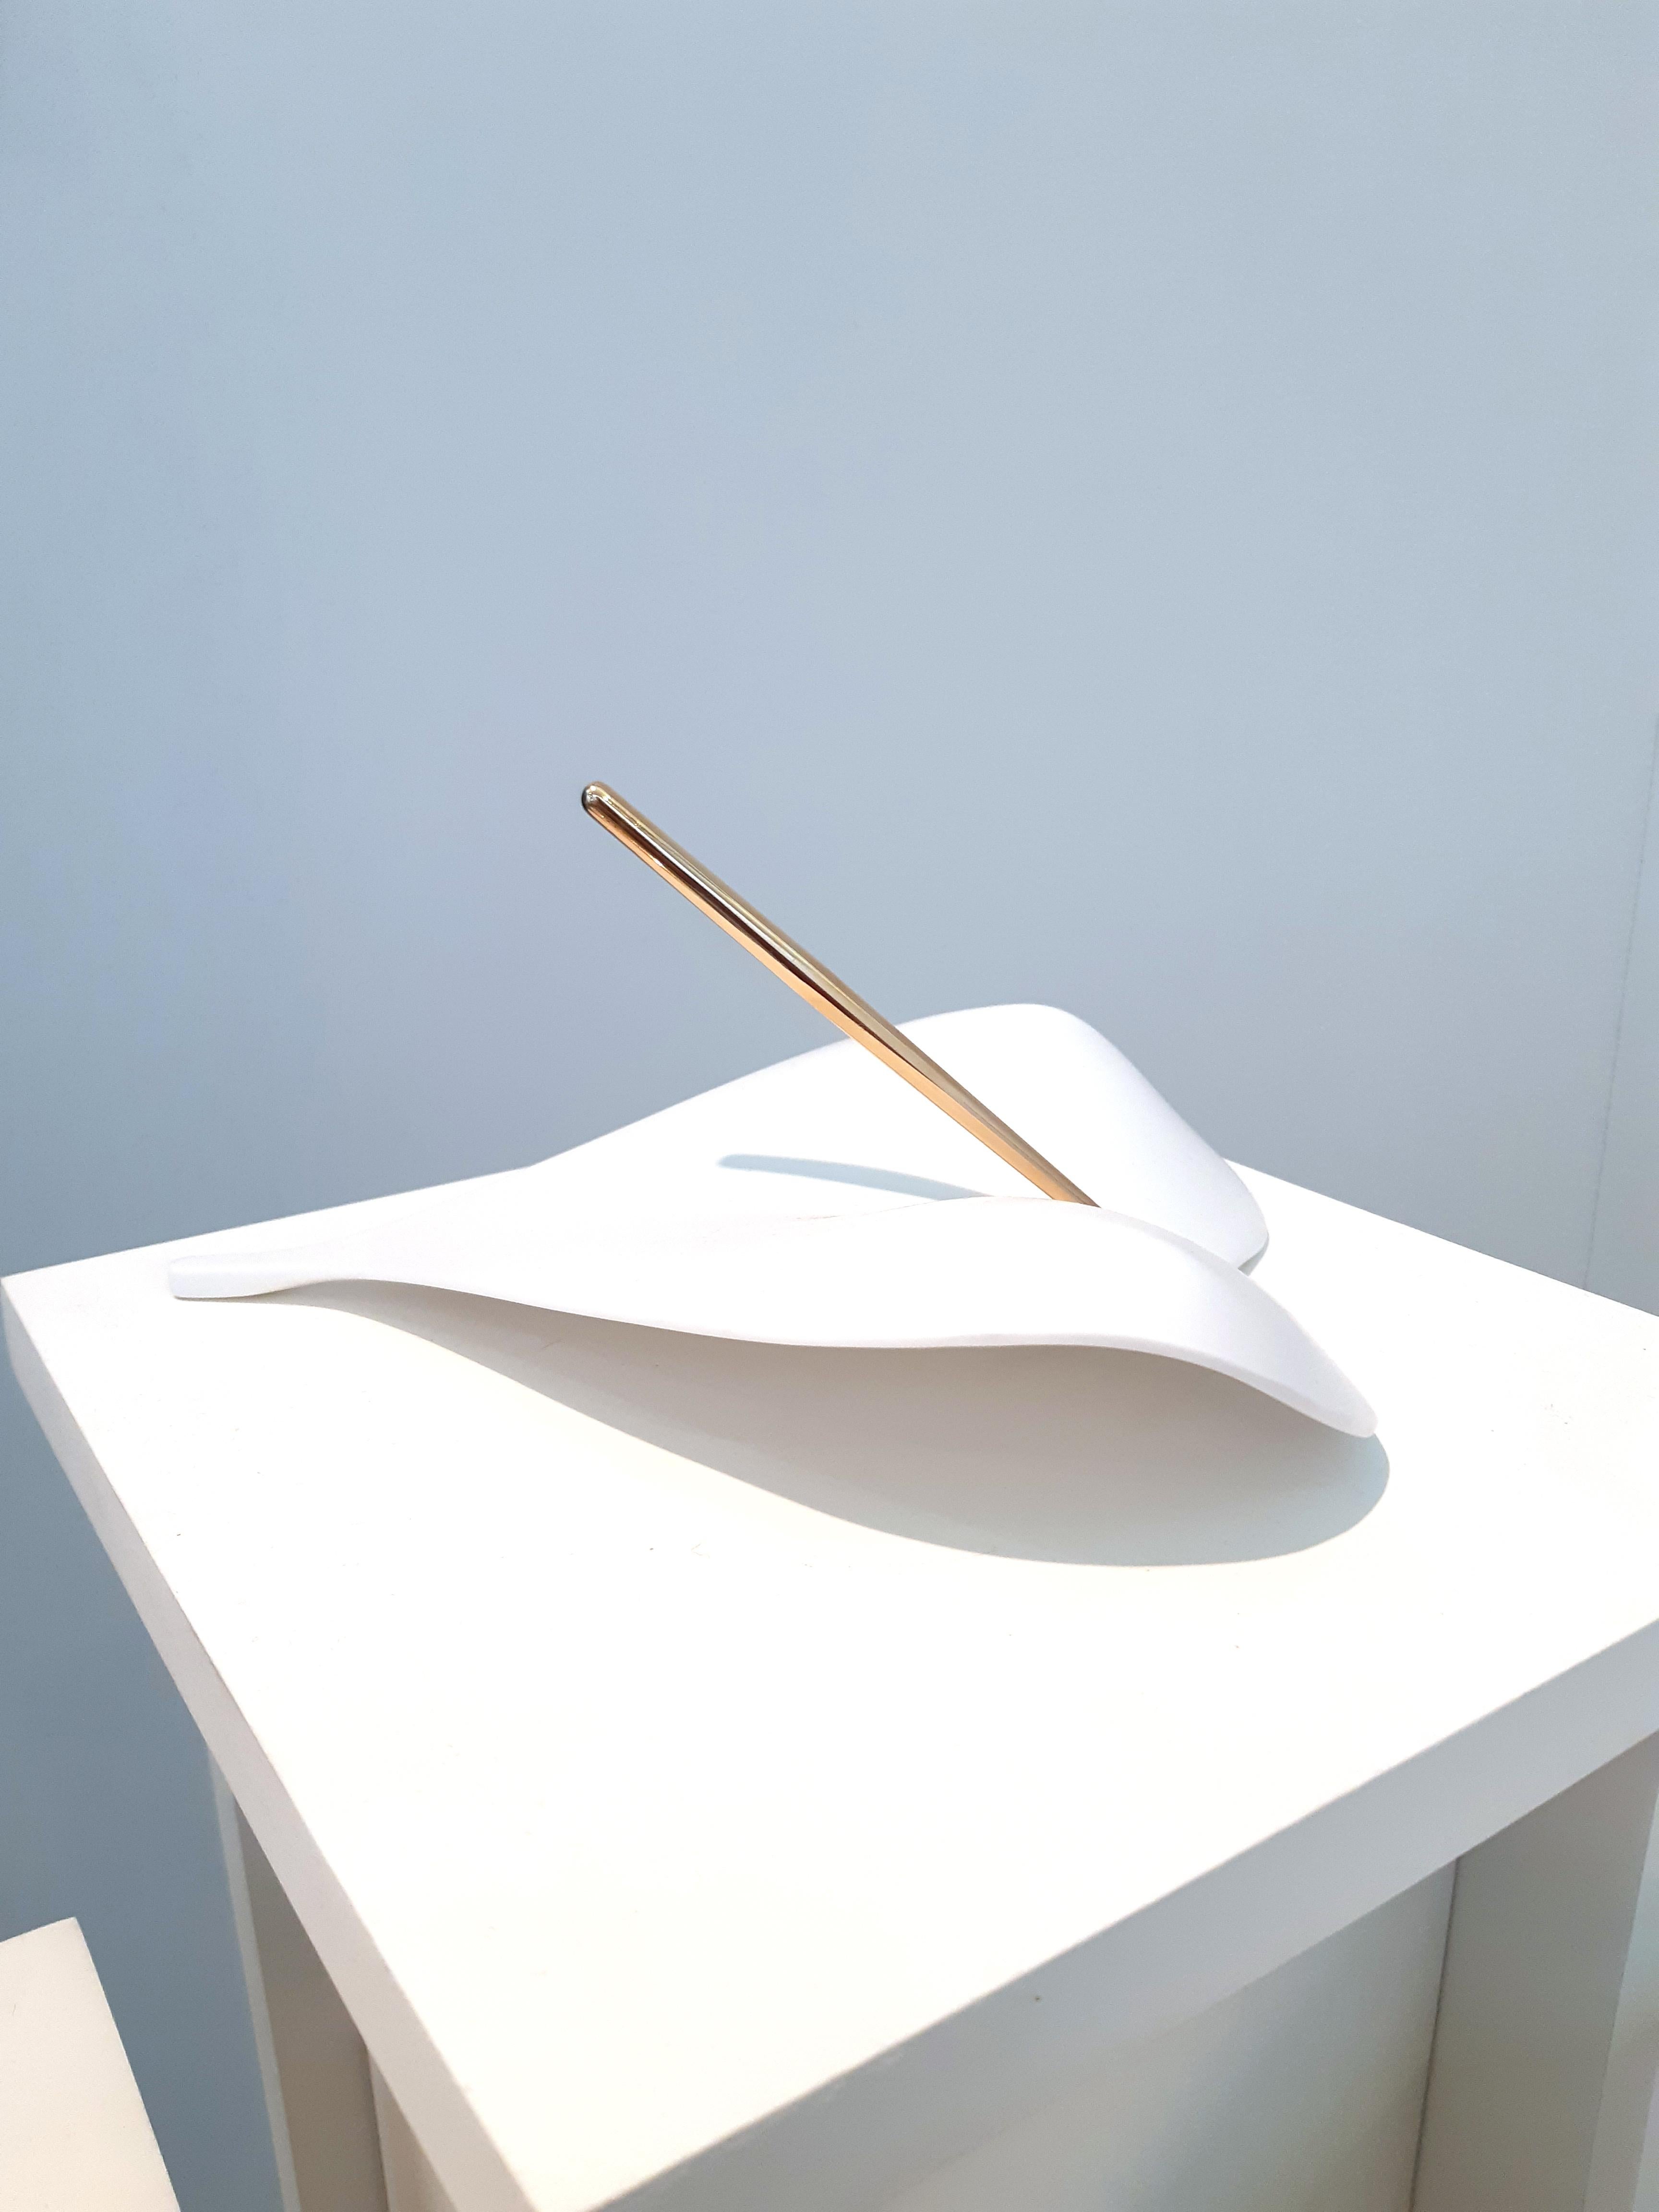 Libidonoso object #3 by Mameluca
Material: corian, gold-plated metal.
Dimensions: D 21 x W 18 x H 10cm.

In reference to Paul Nacke’s states about Narcissism, being an attitude of a person who treats his own body in the same way as the body of a